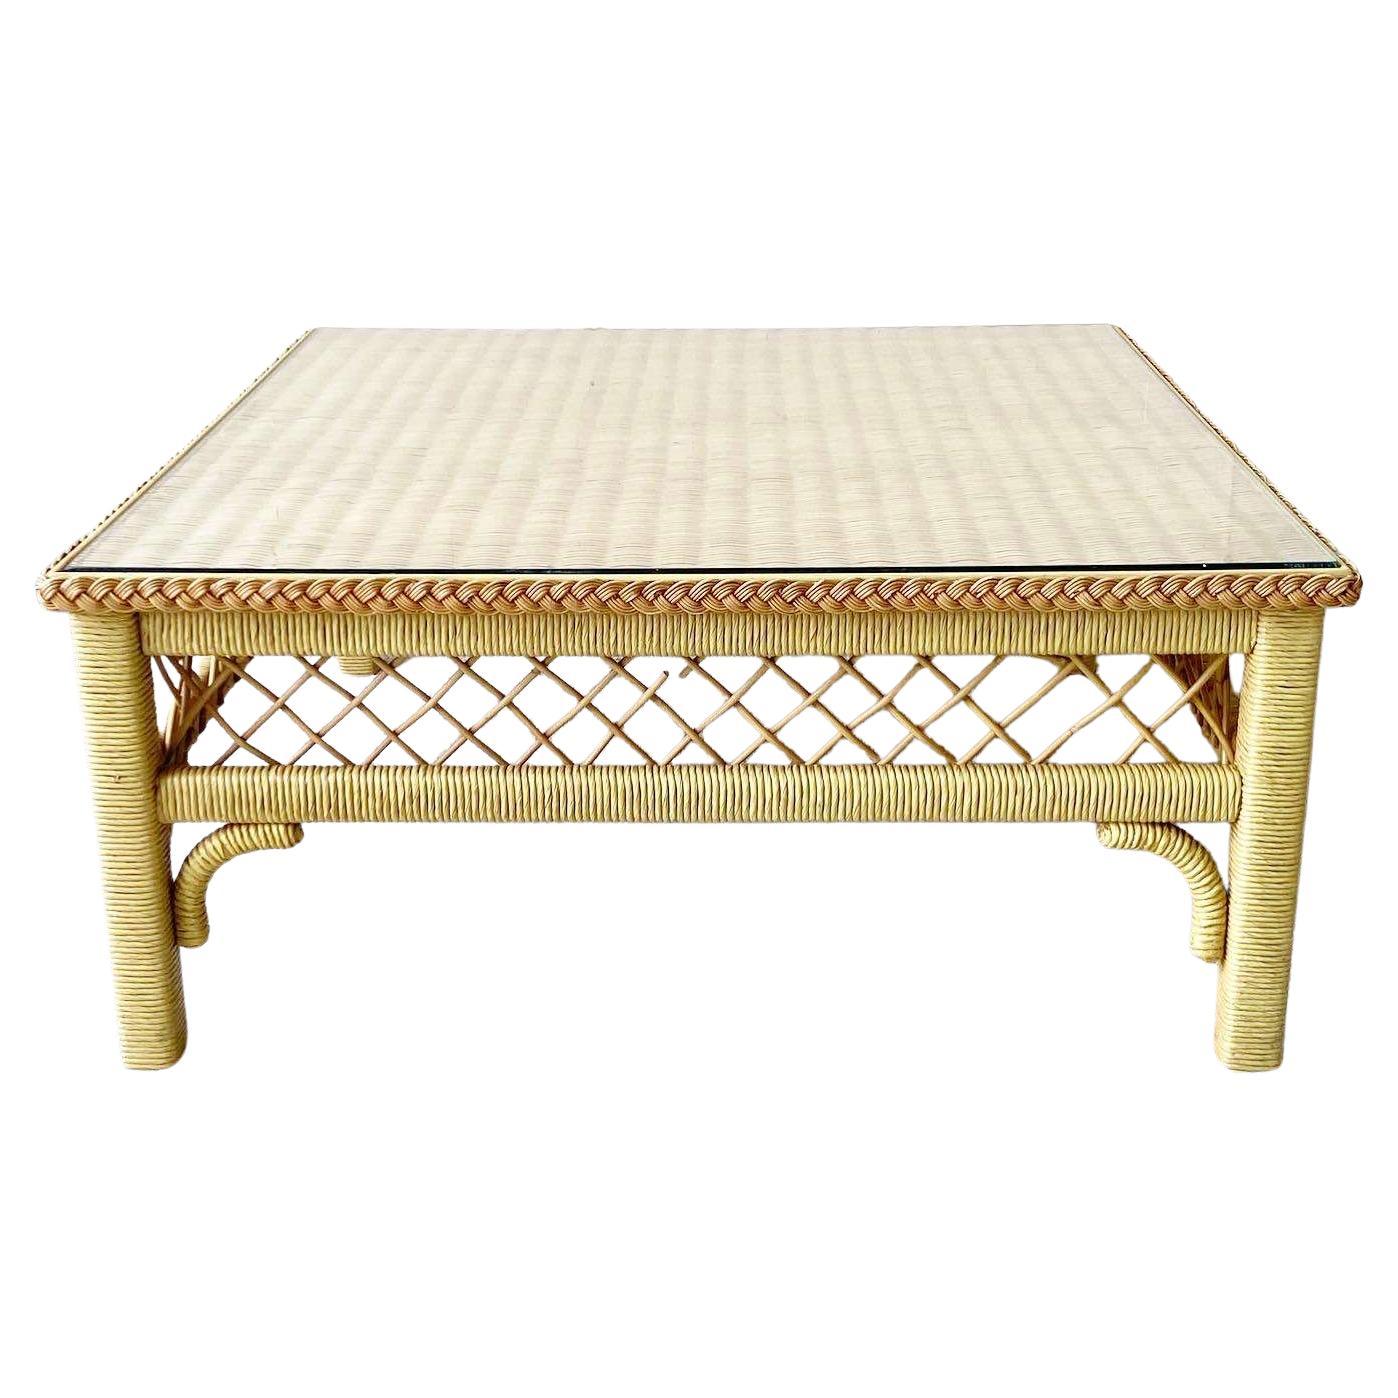 Boho Chic Wicker and Rattan Coffee Table With Glass Top by Henry Link For Sale